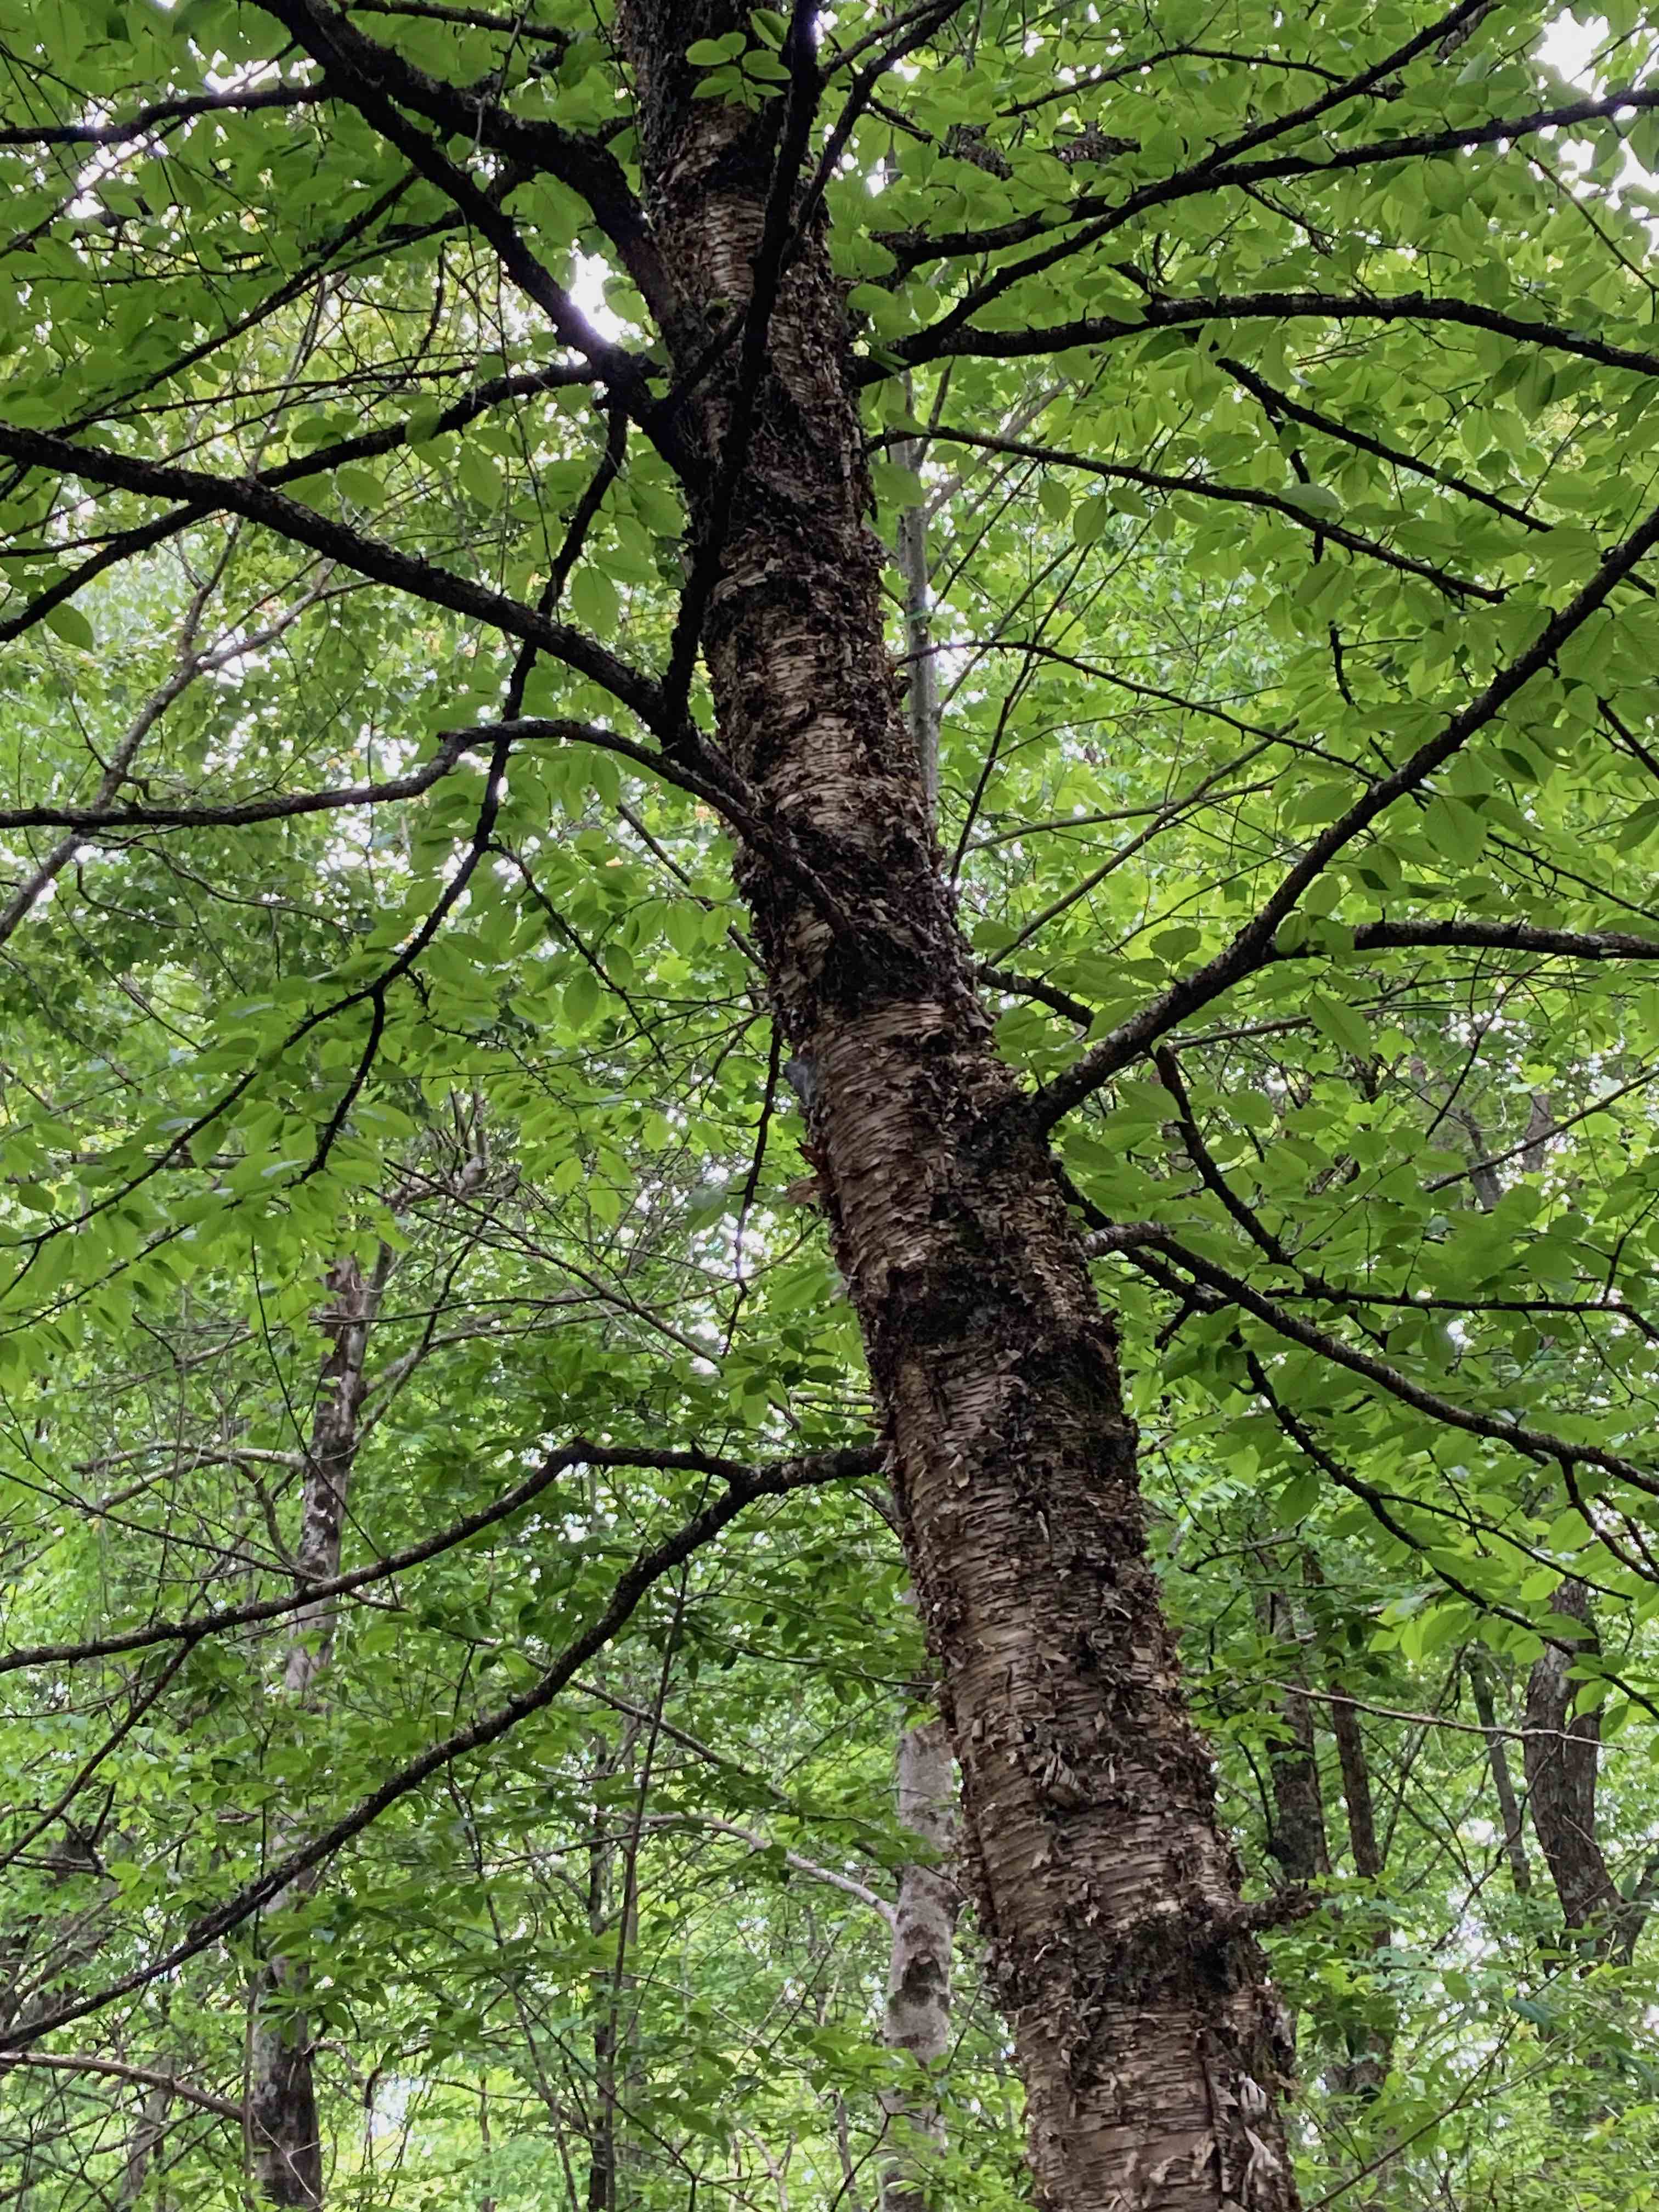 The Scientific Name is Betula alleghaniensis [= Betula lutea]. You will likely hear them called Yellow Birch. This picture shows the Dull gold-colored, peeling bark. When you scrape the bark from the twigs, they have a wintergreen scent. of Betula alleghaniensis [= Betula lutea]